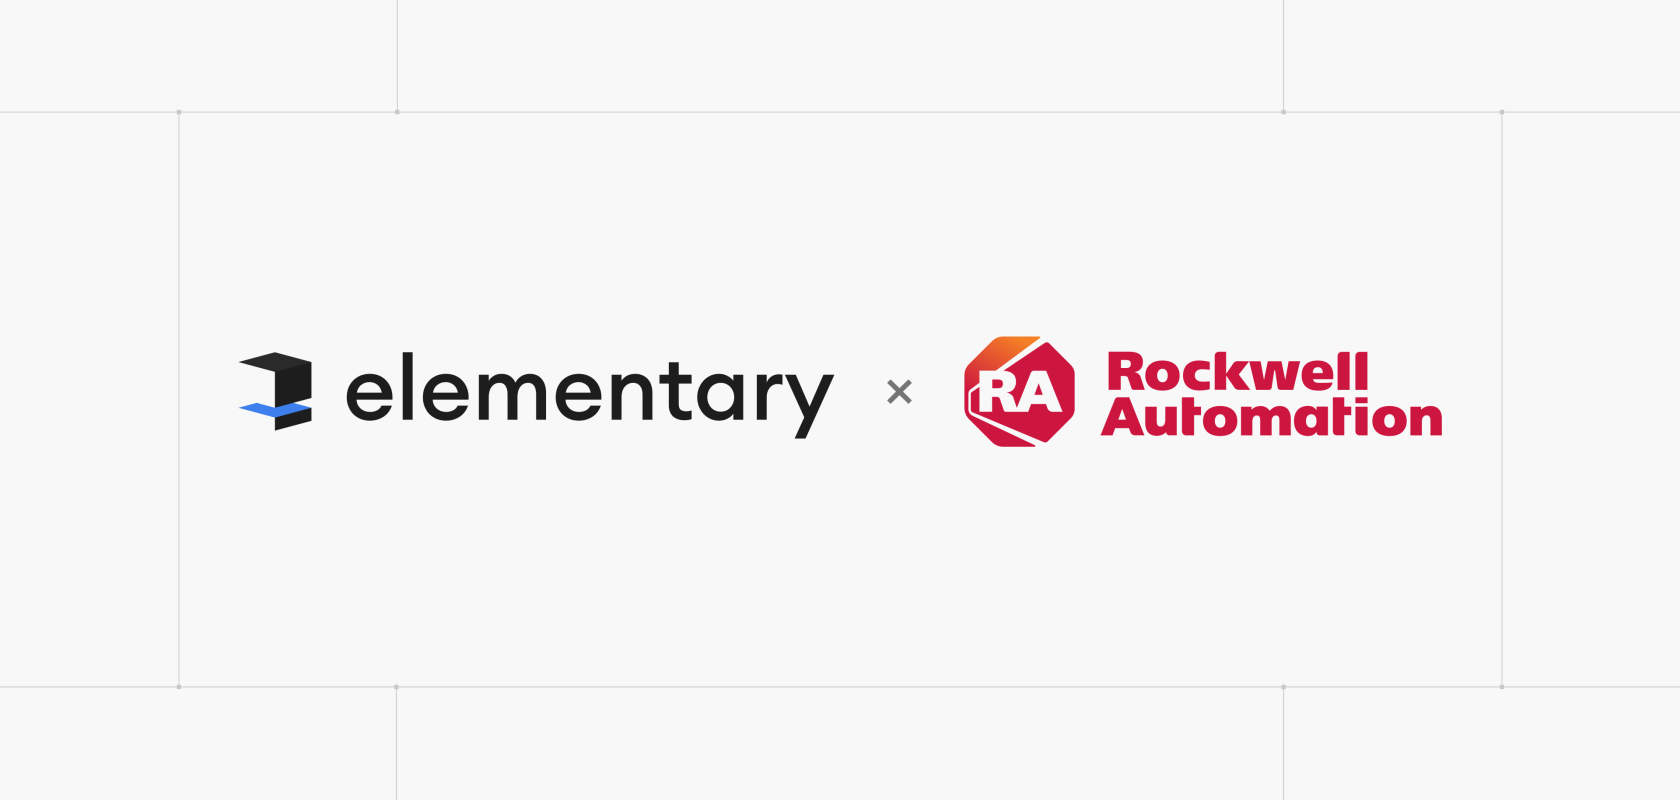 Rockwell Automation makes a strategic investment in Elementary, an innovator in AI-powered machine vision